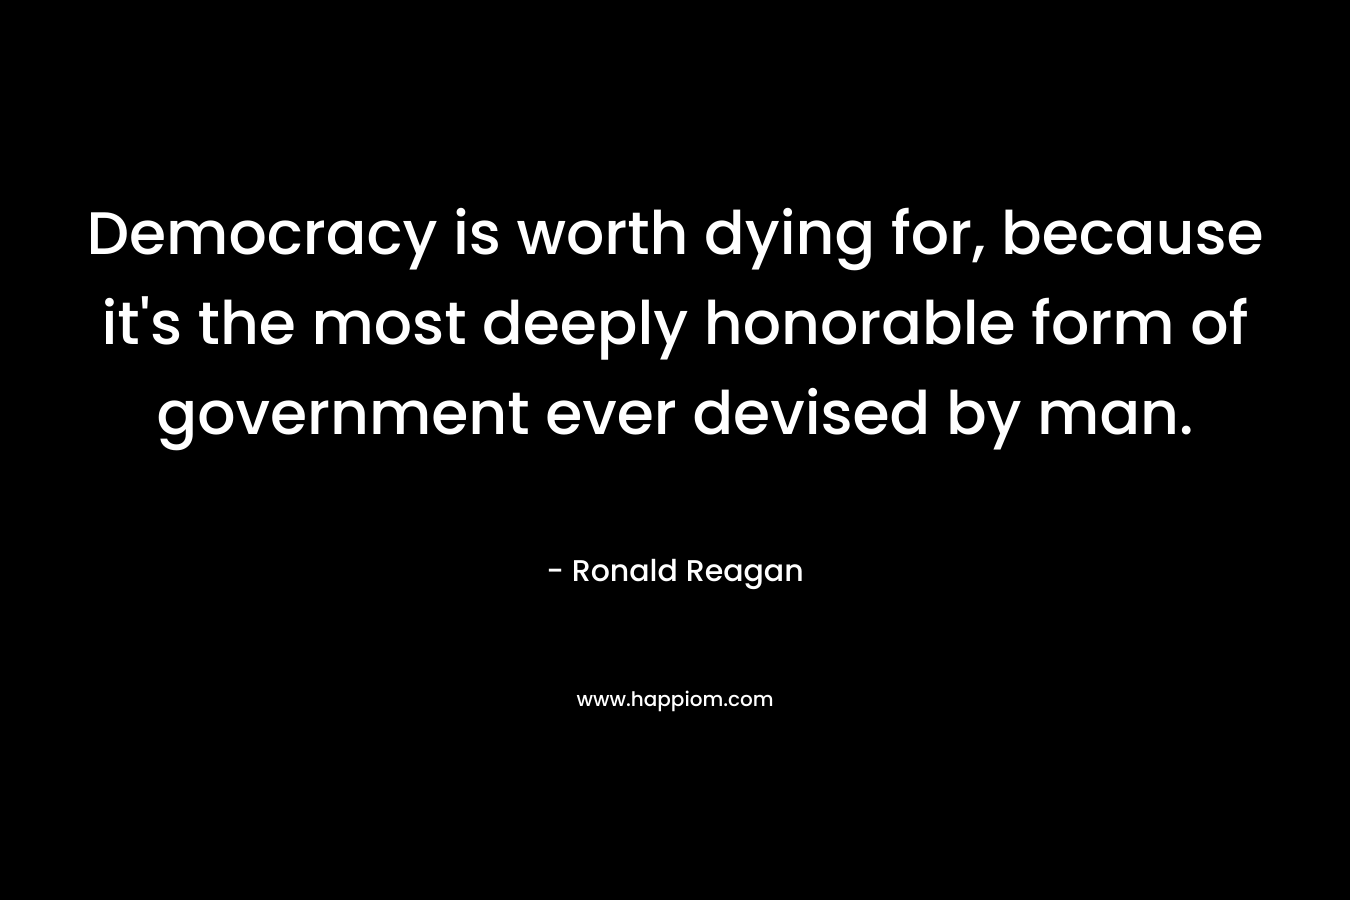 Democracy is worth dying for, because it’s the most deeply honorable form of government ever devised by man. – Ronald Reagan